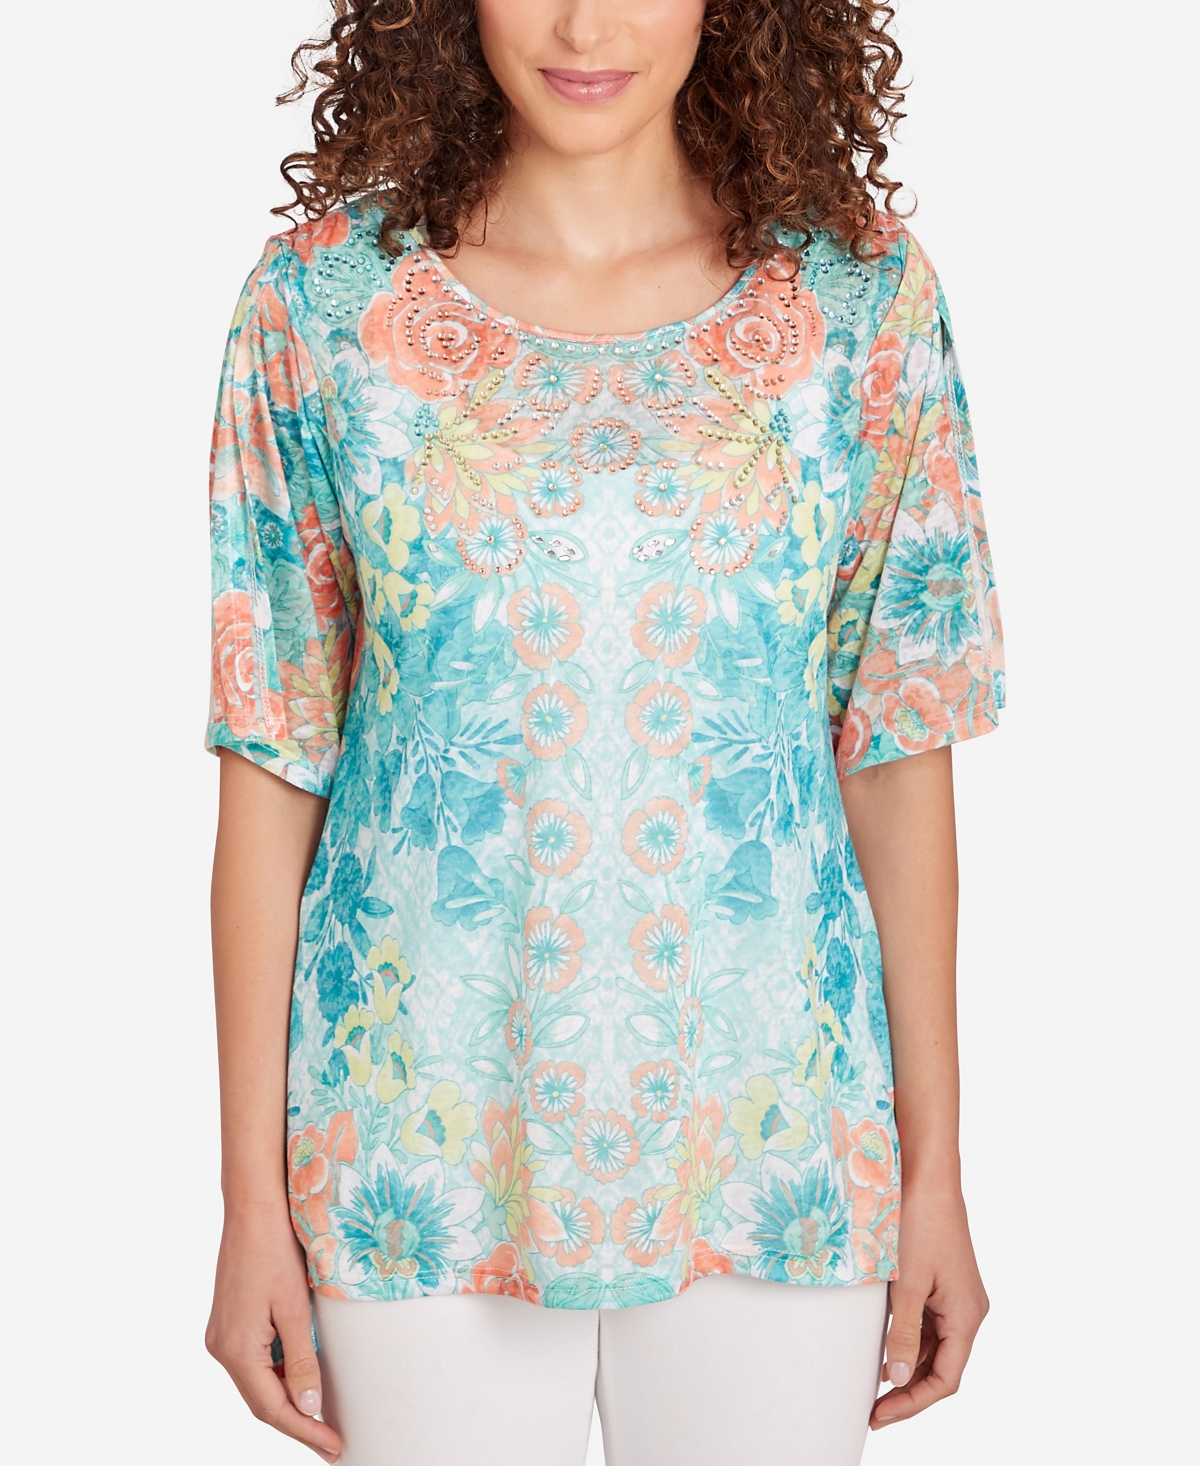 Petite Embroidered Floral Top - Clear Blue Multi